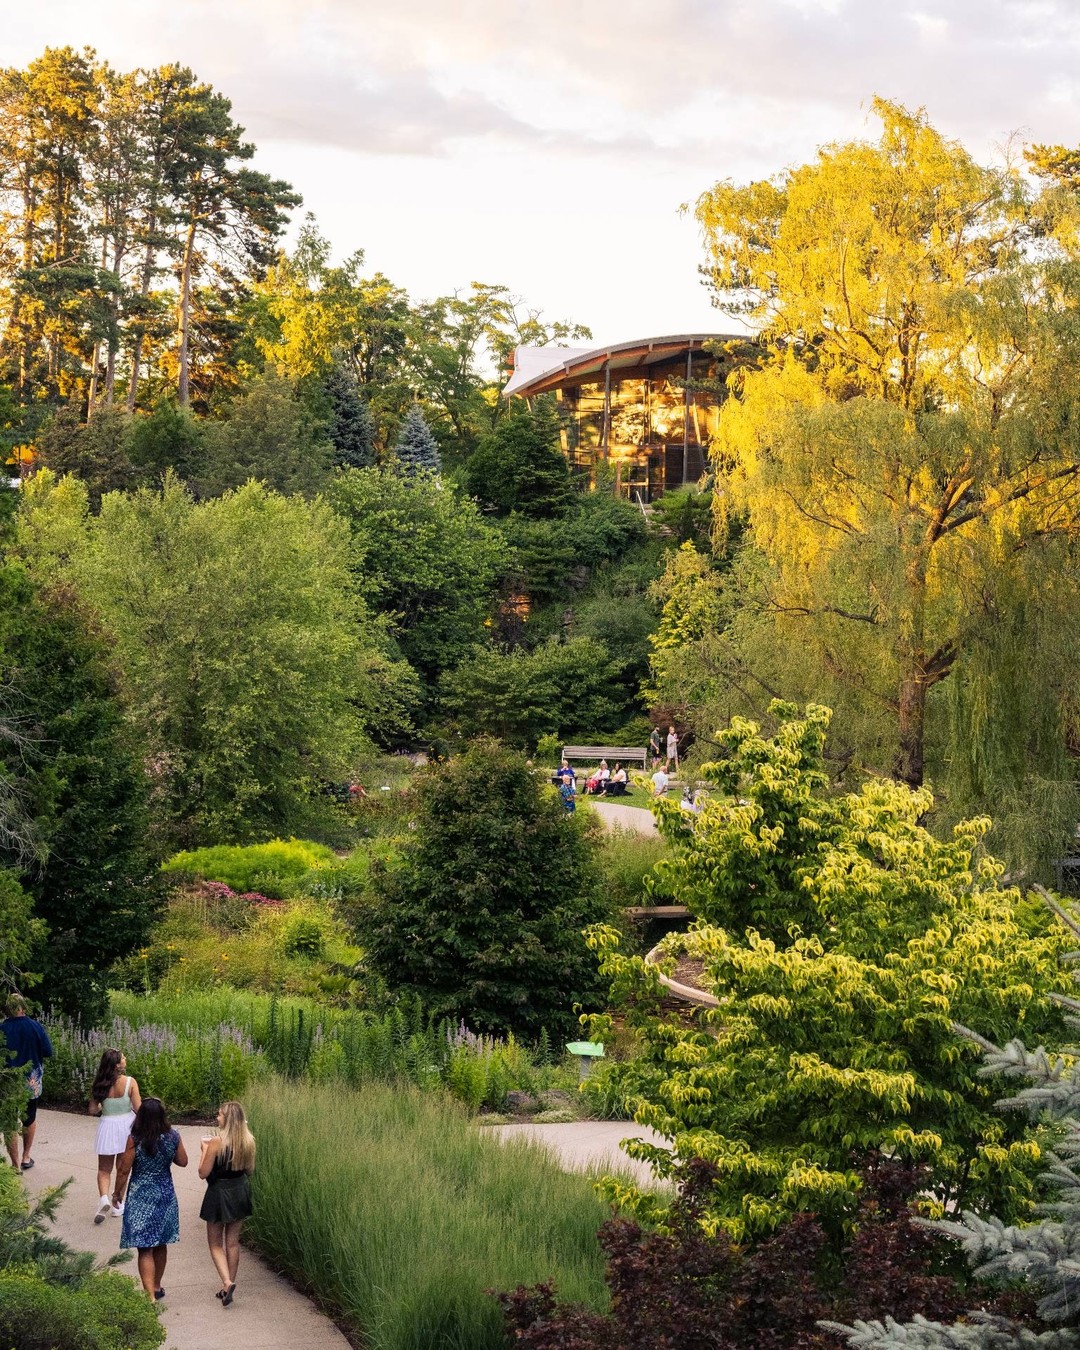 Lower Rock Garden at sunset. Visitors are walking along the winding garden paths